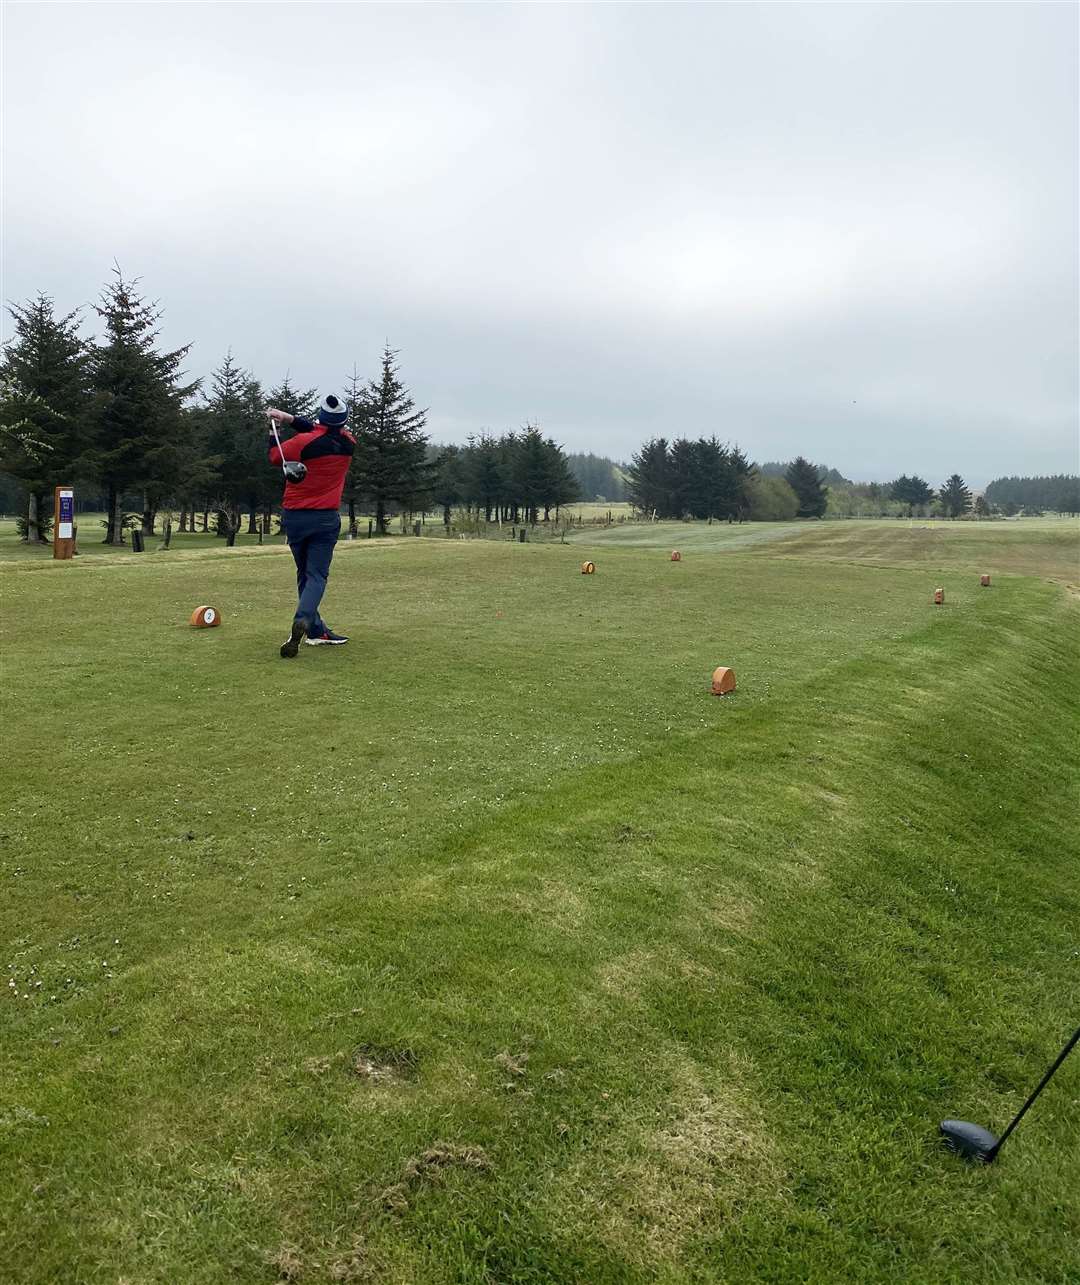 One of the players teeing off in cloudy, overcast conditions at Thurso Golf Club.